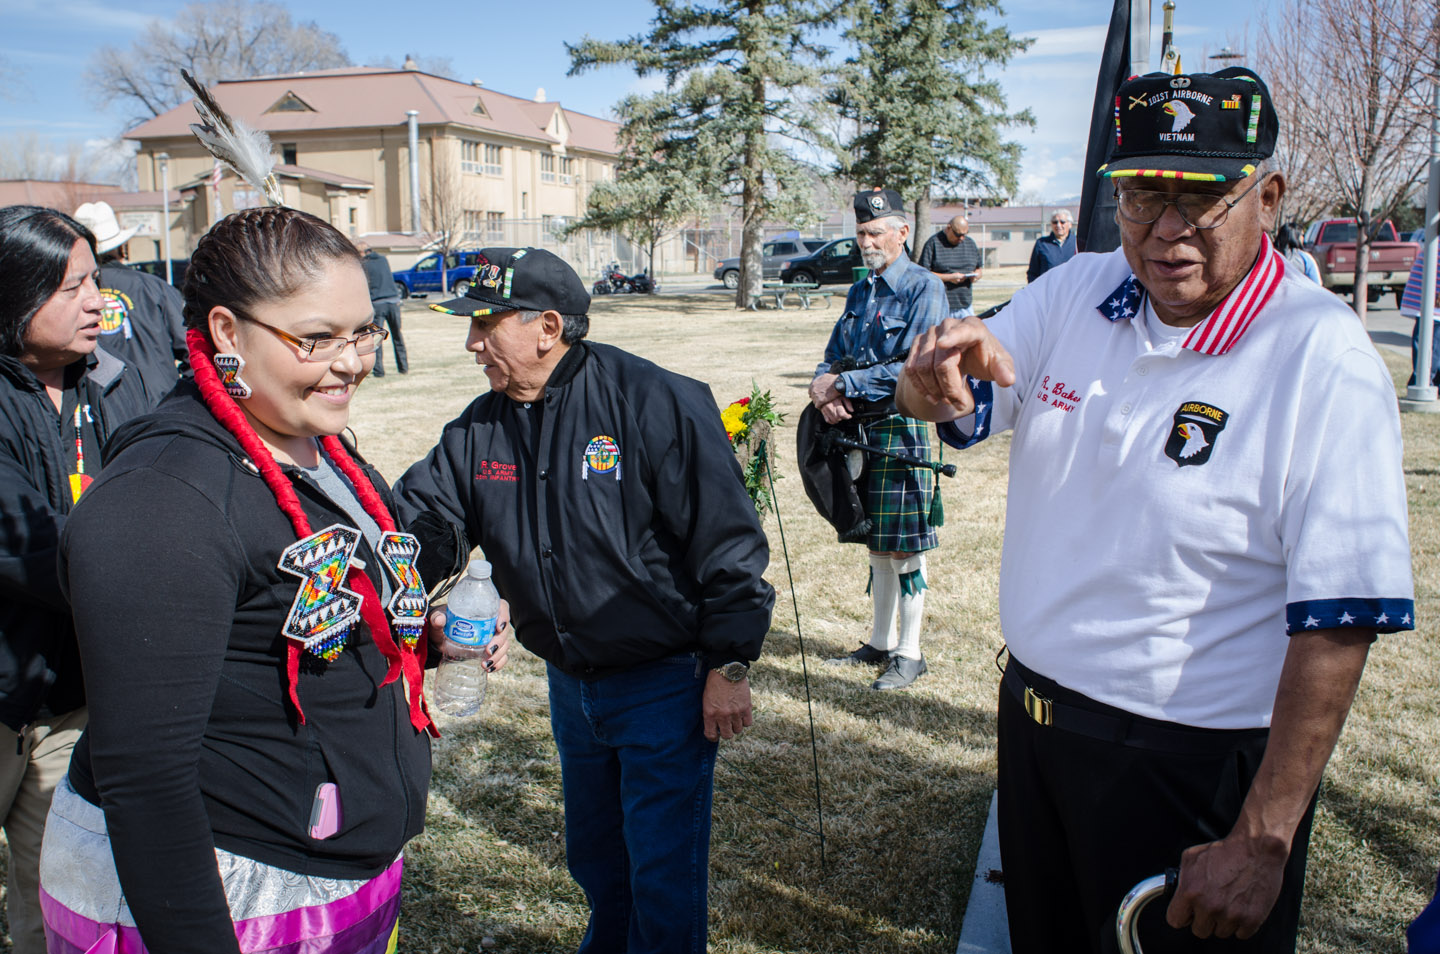 Southern Ute tribal member Ronnie Baker greets attendees following the event.